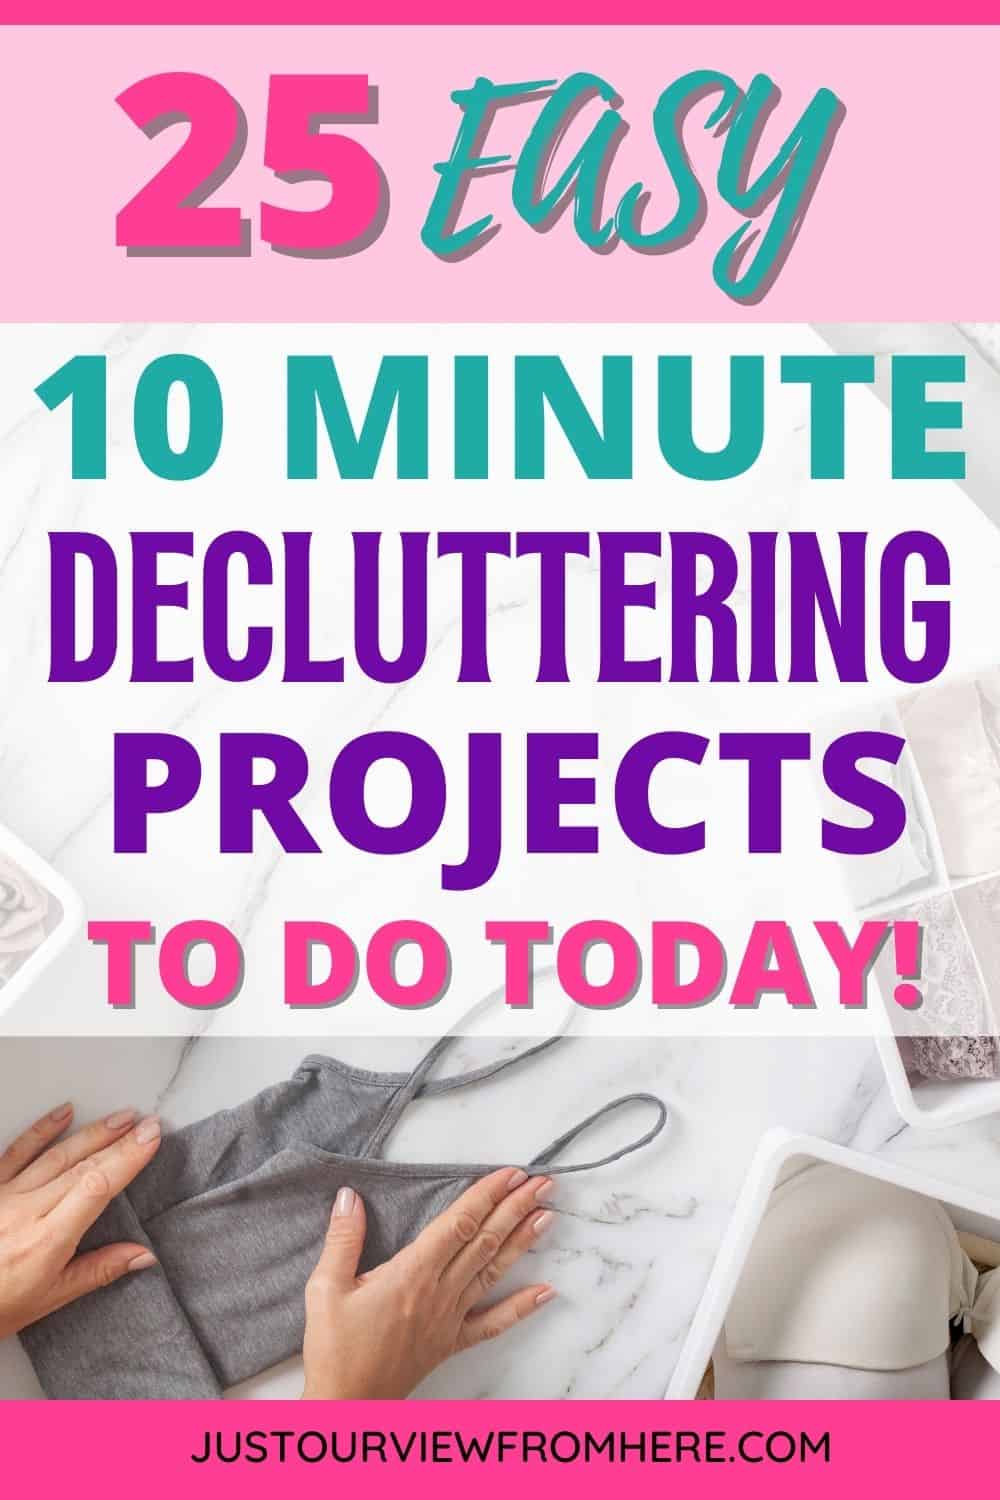 25 EASY 10 MINUTE DECLUTTERING PROJECTS TO DO TODAY